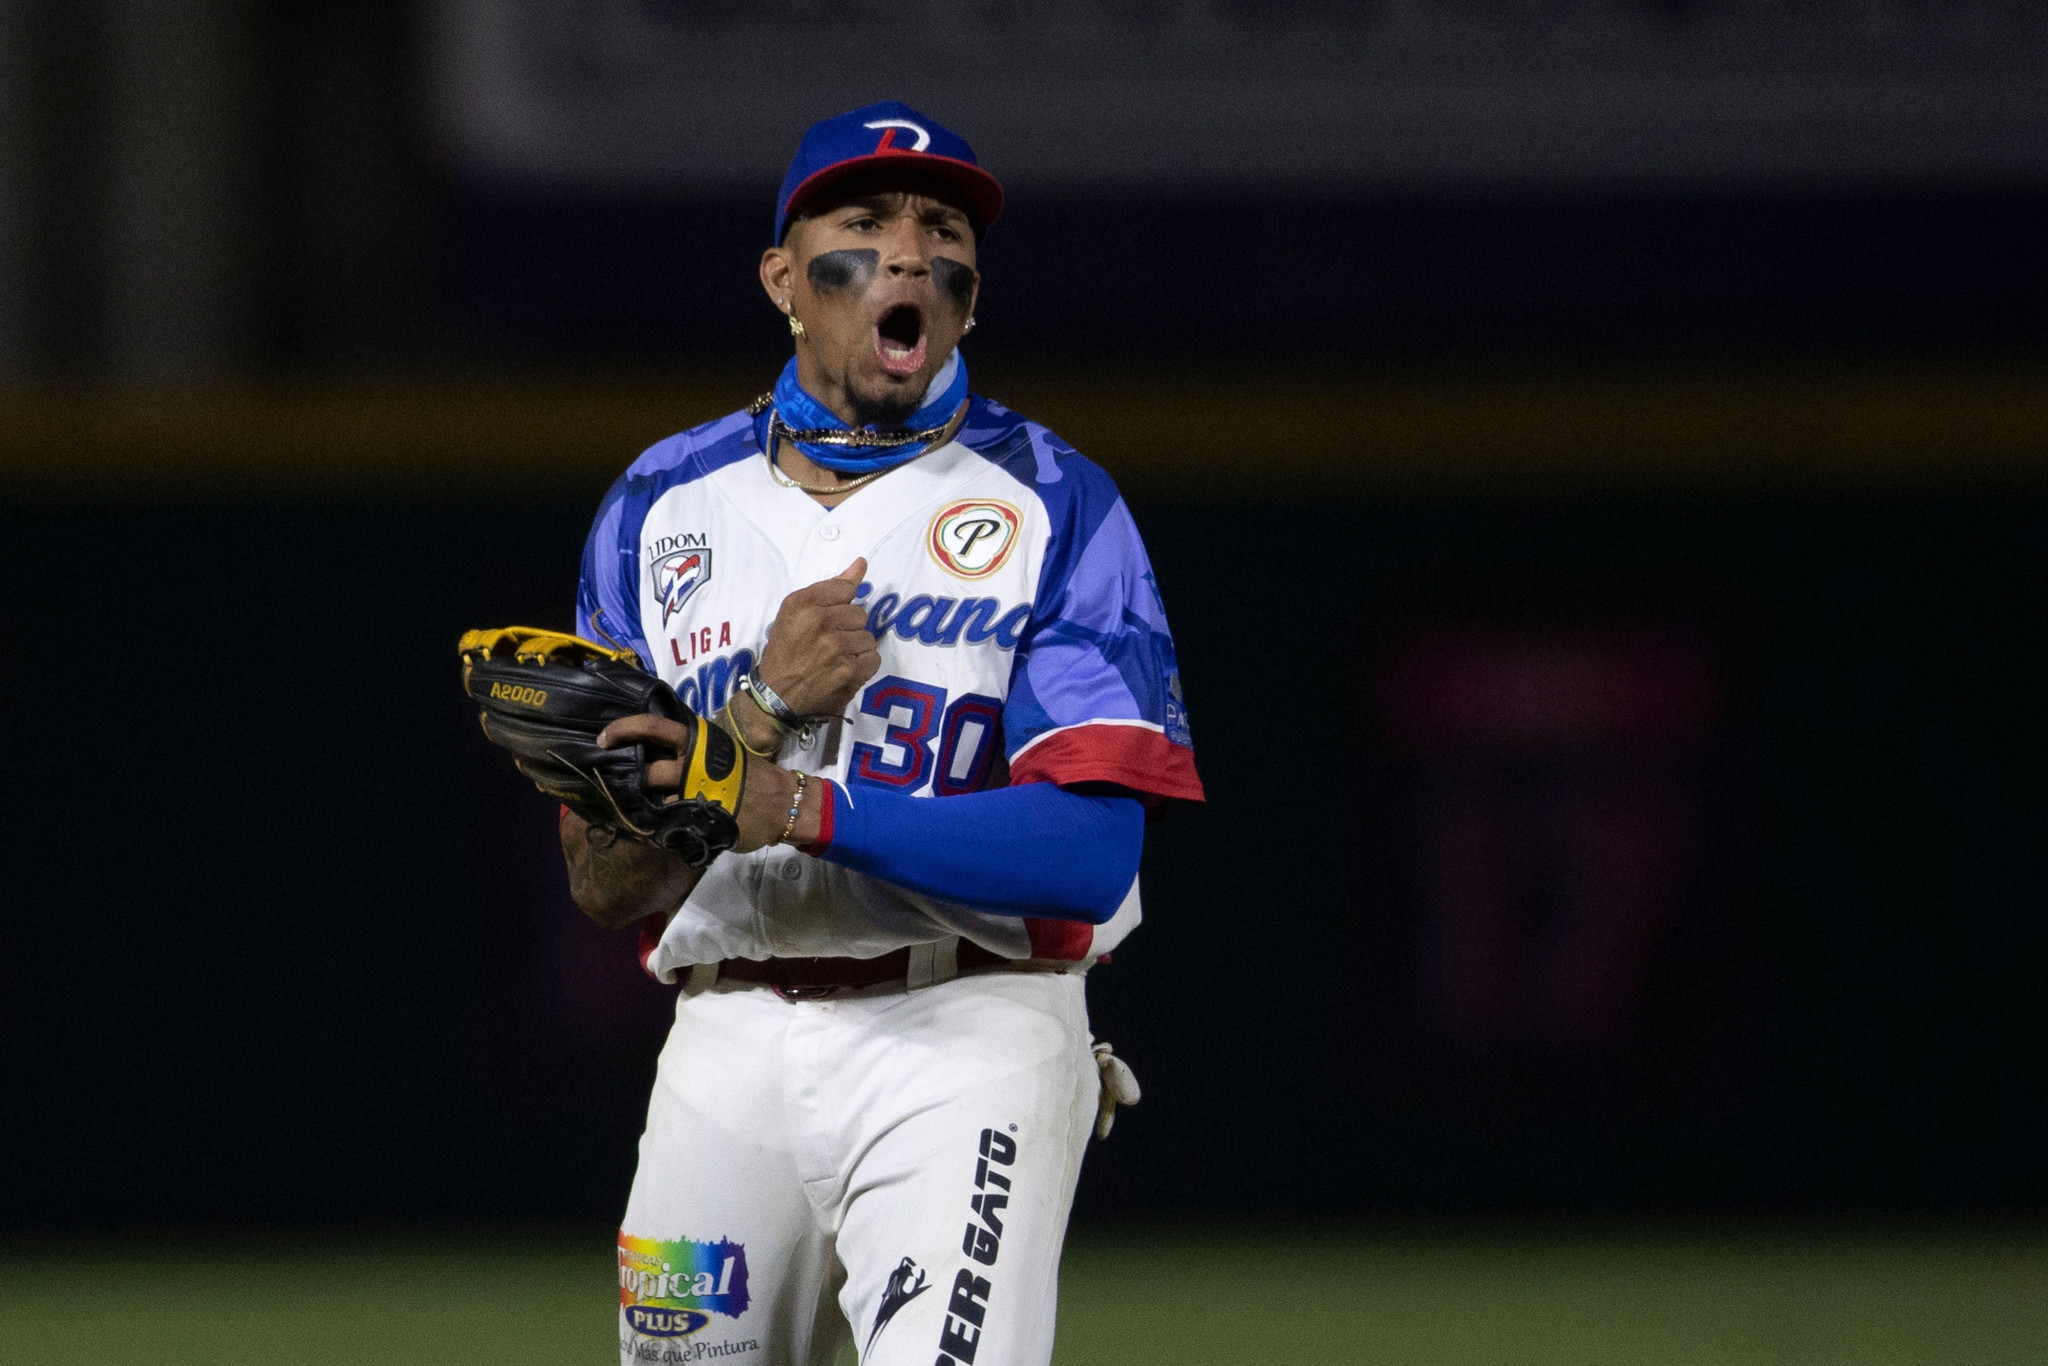 The Dominican Republic will launch a new university baseball league ©Getty Images